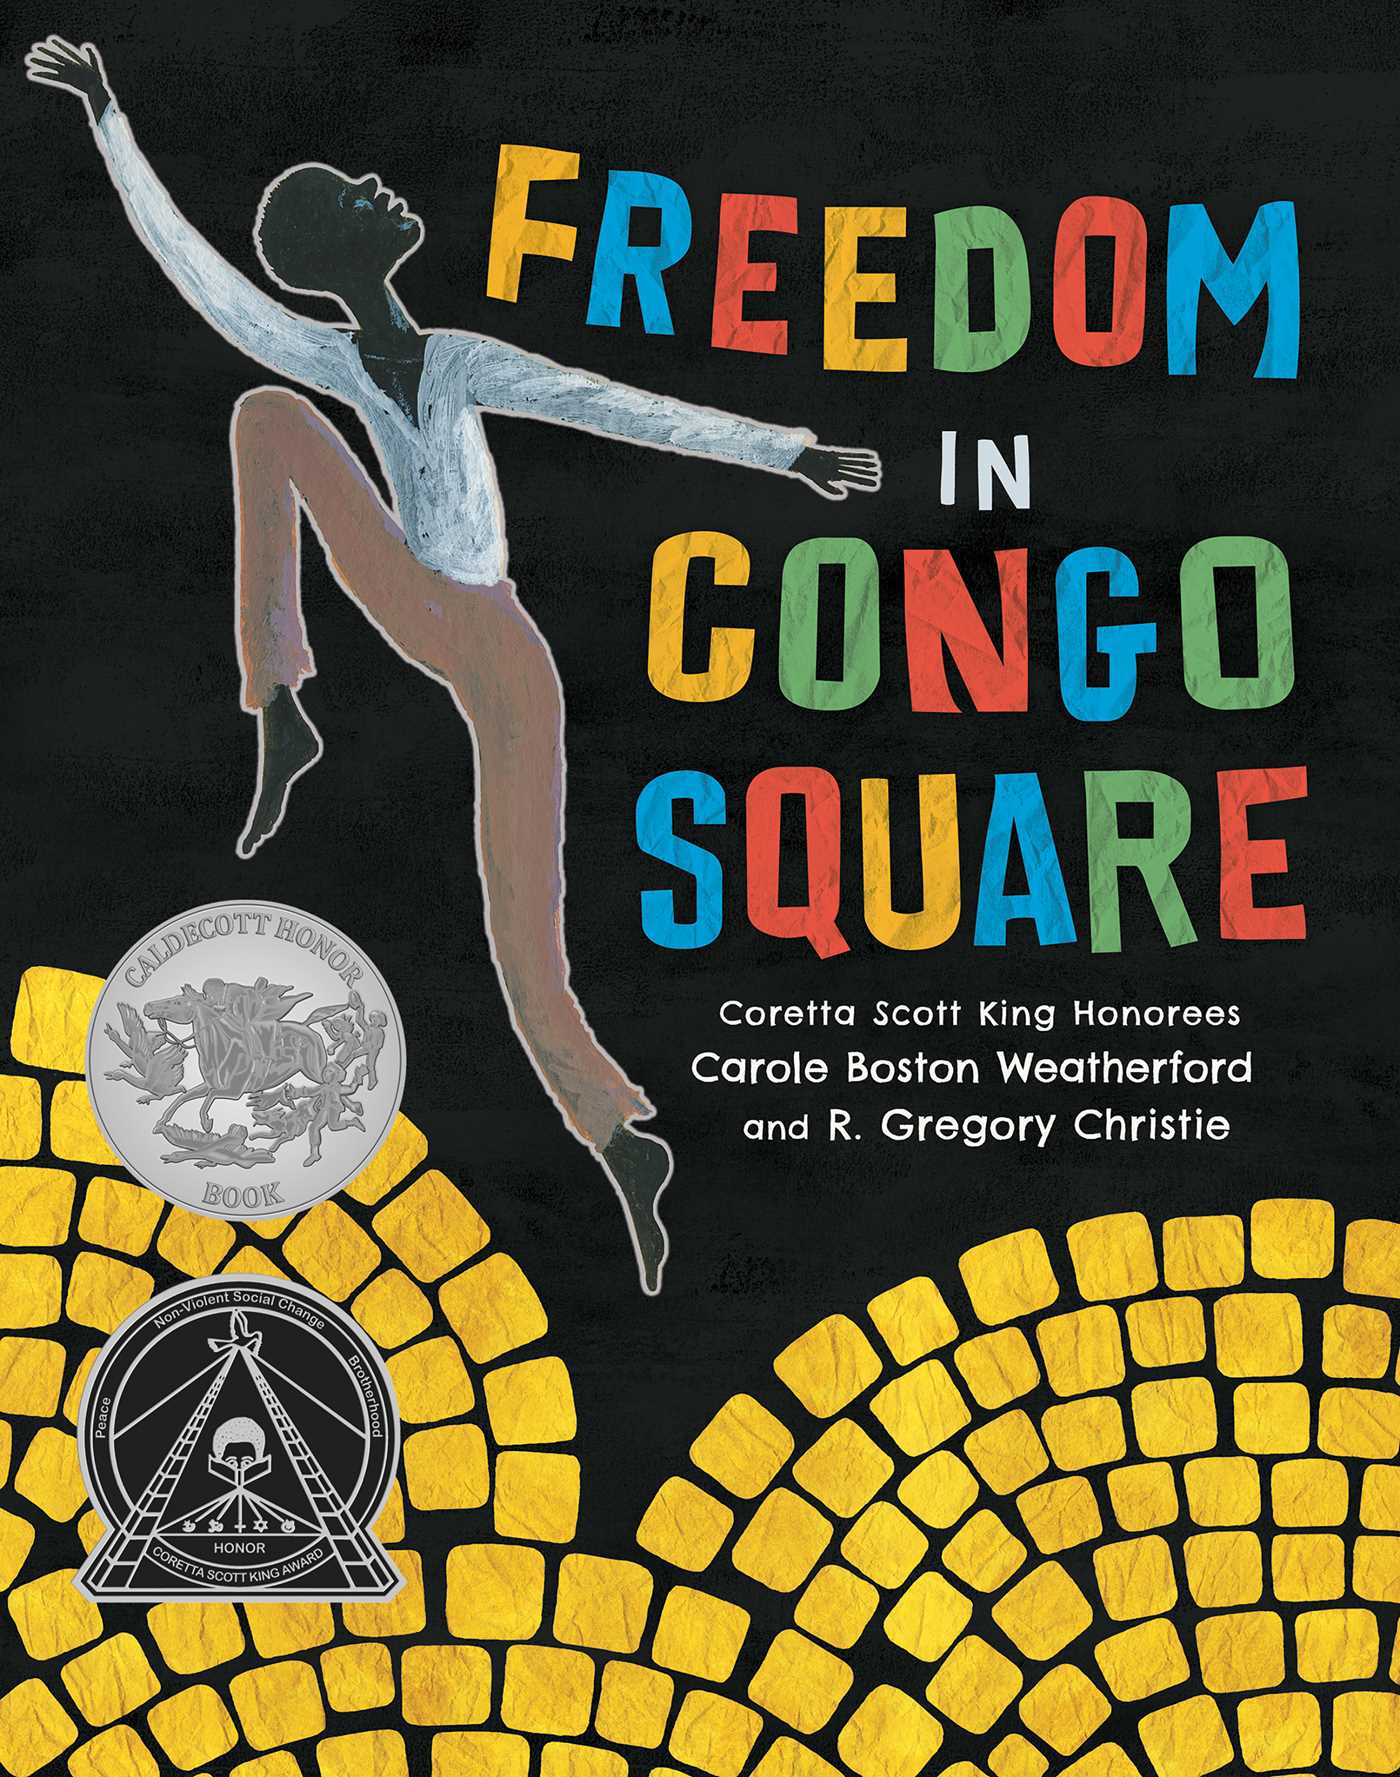 Book Cover for the Freedom in Congo Square